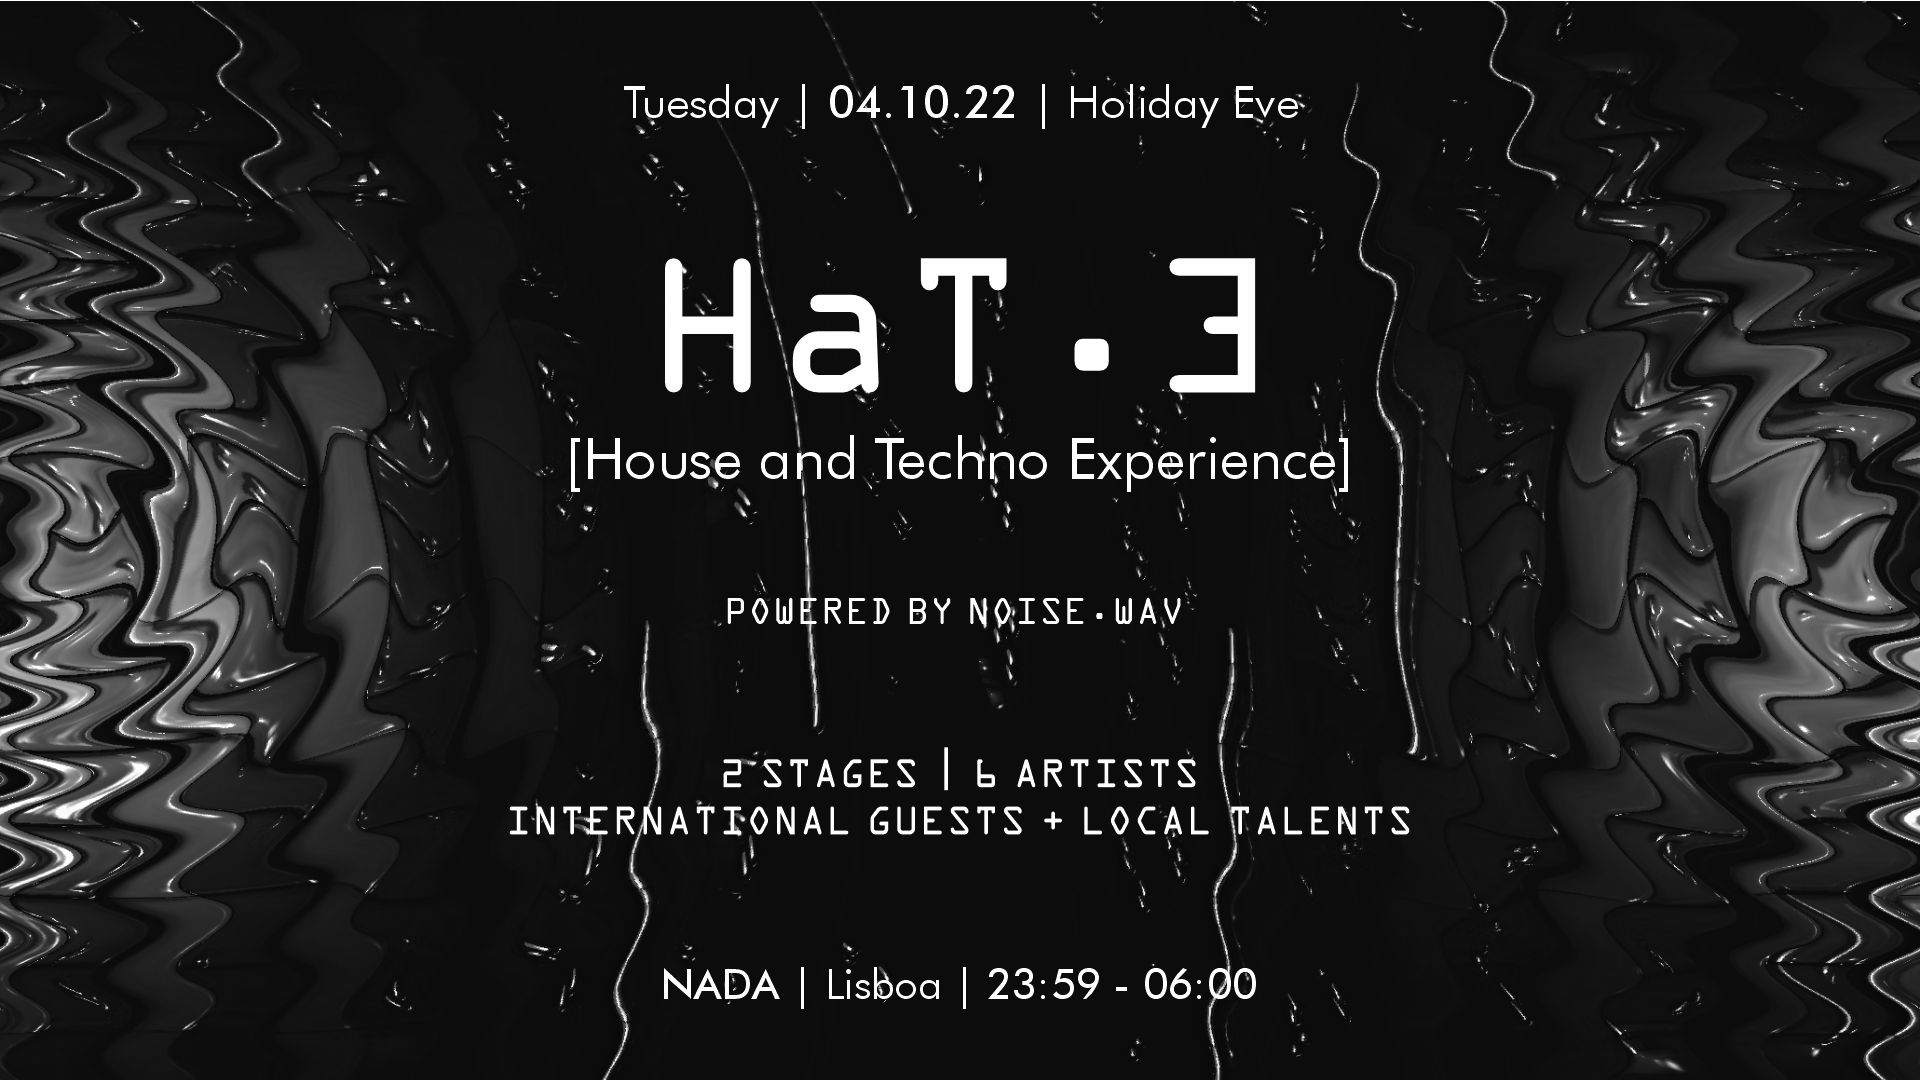 HaT.E [House and Techno Experience] - フライヤー表